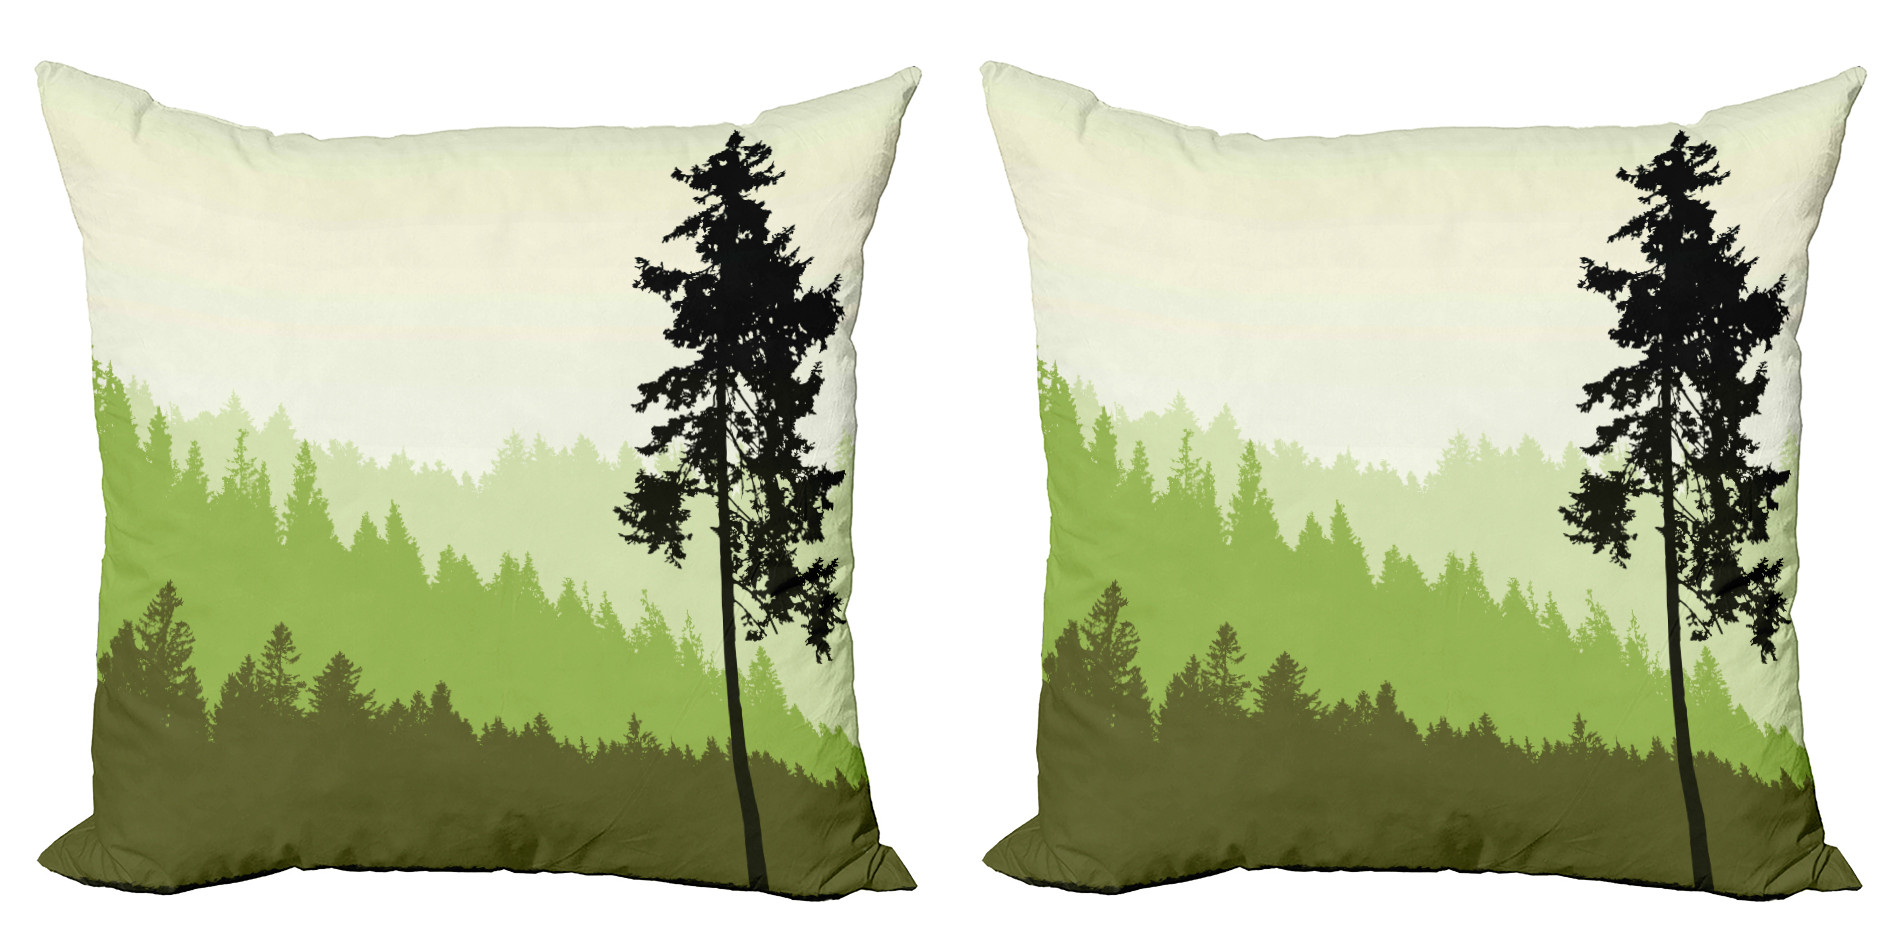 Nature Throw Pillow Cushion Cover Pack of 2, Nature Theme Pine Tree Silhouette on an Abstract Style Background, Zippered Double-Side Digital Print, 4 Sizes, Lime Green Army Green, by Ambesonne - image 1 of 2